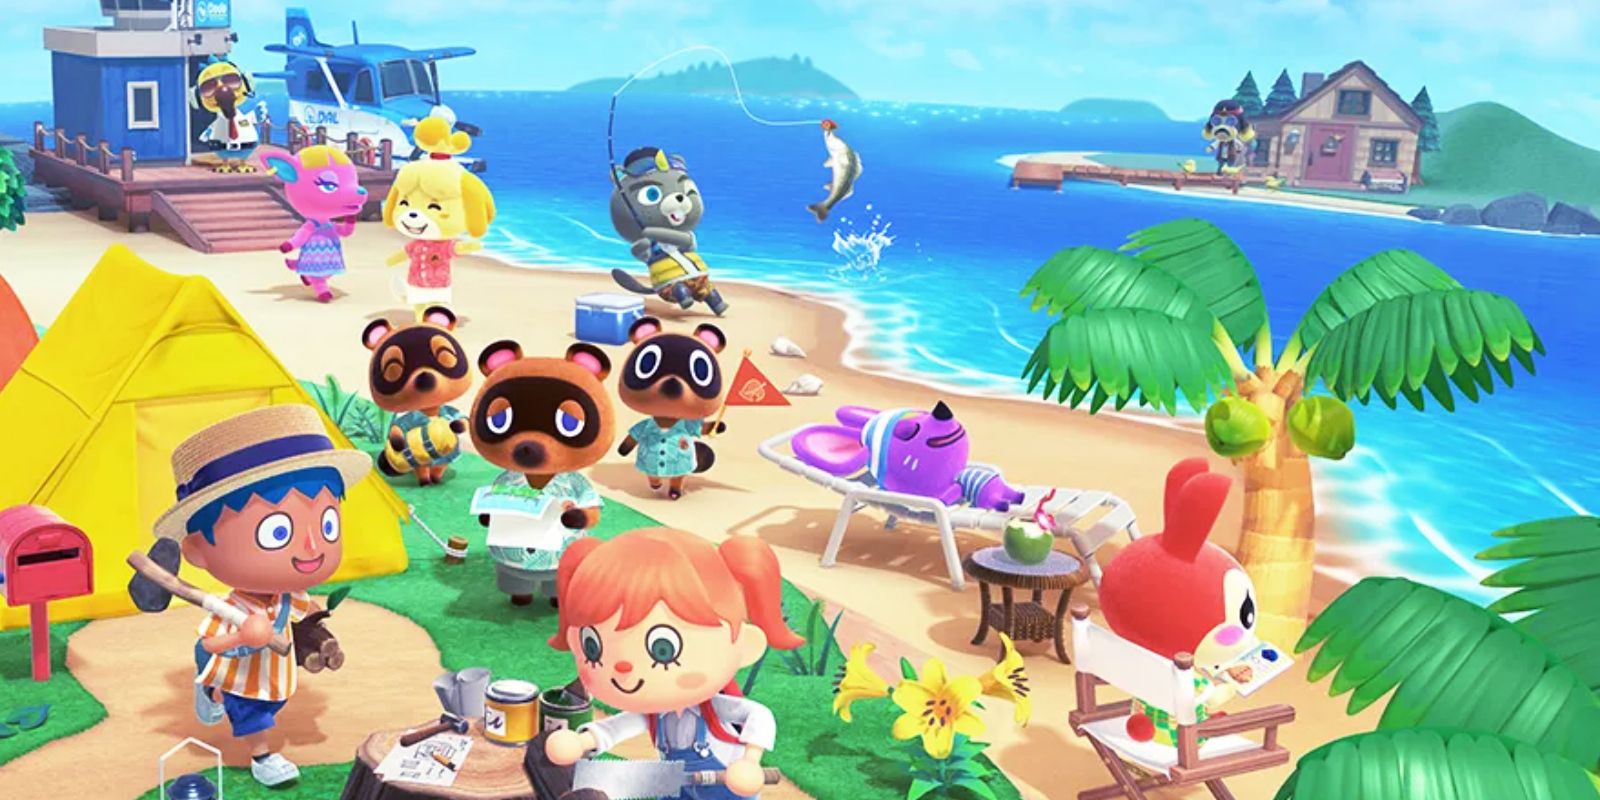 Beach party featuring the player and many villagers in Animal Crossing New Horizons.